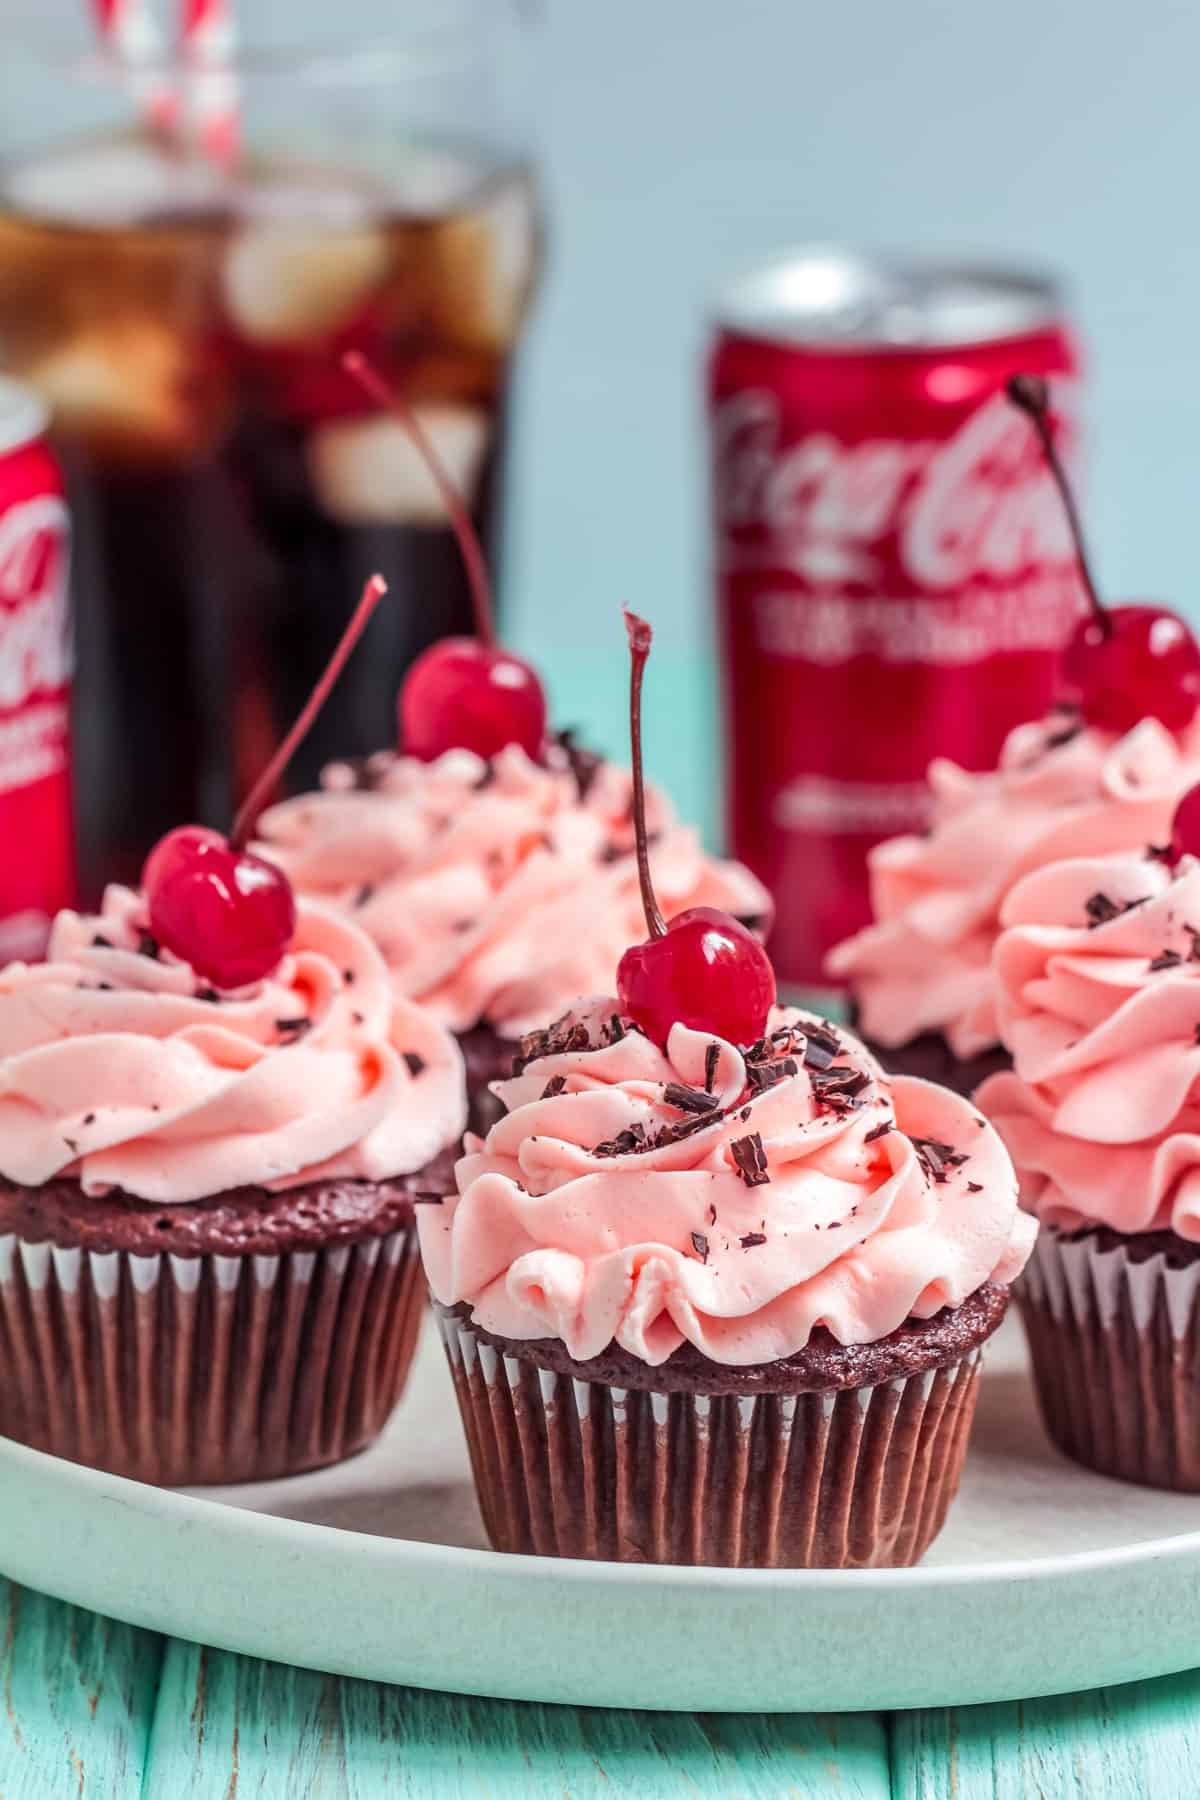 Multiple Cherry Coke Cupcakes on platter garnished with coke can and glass in background.